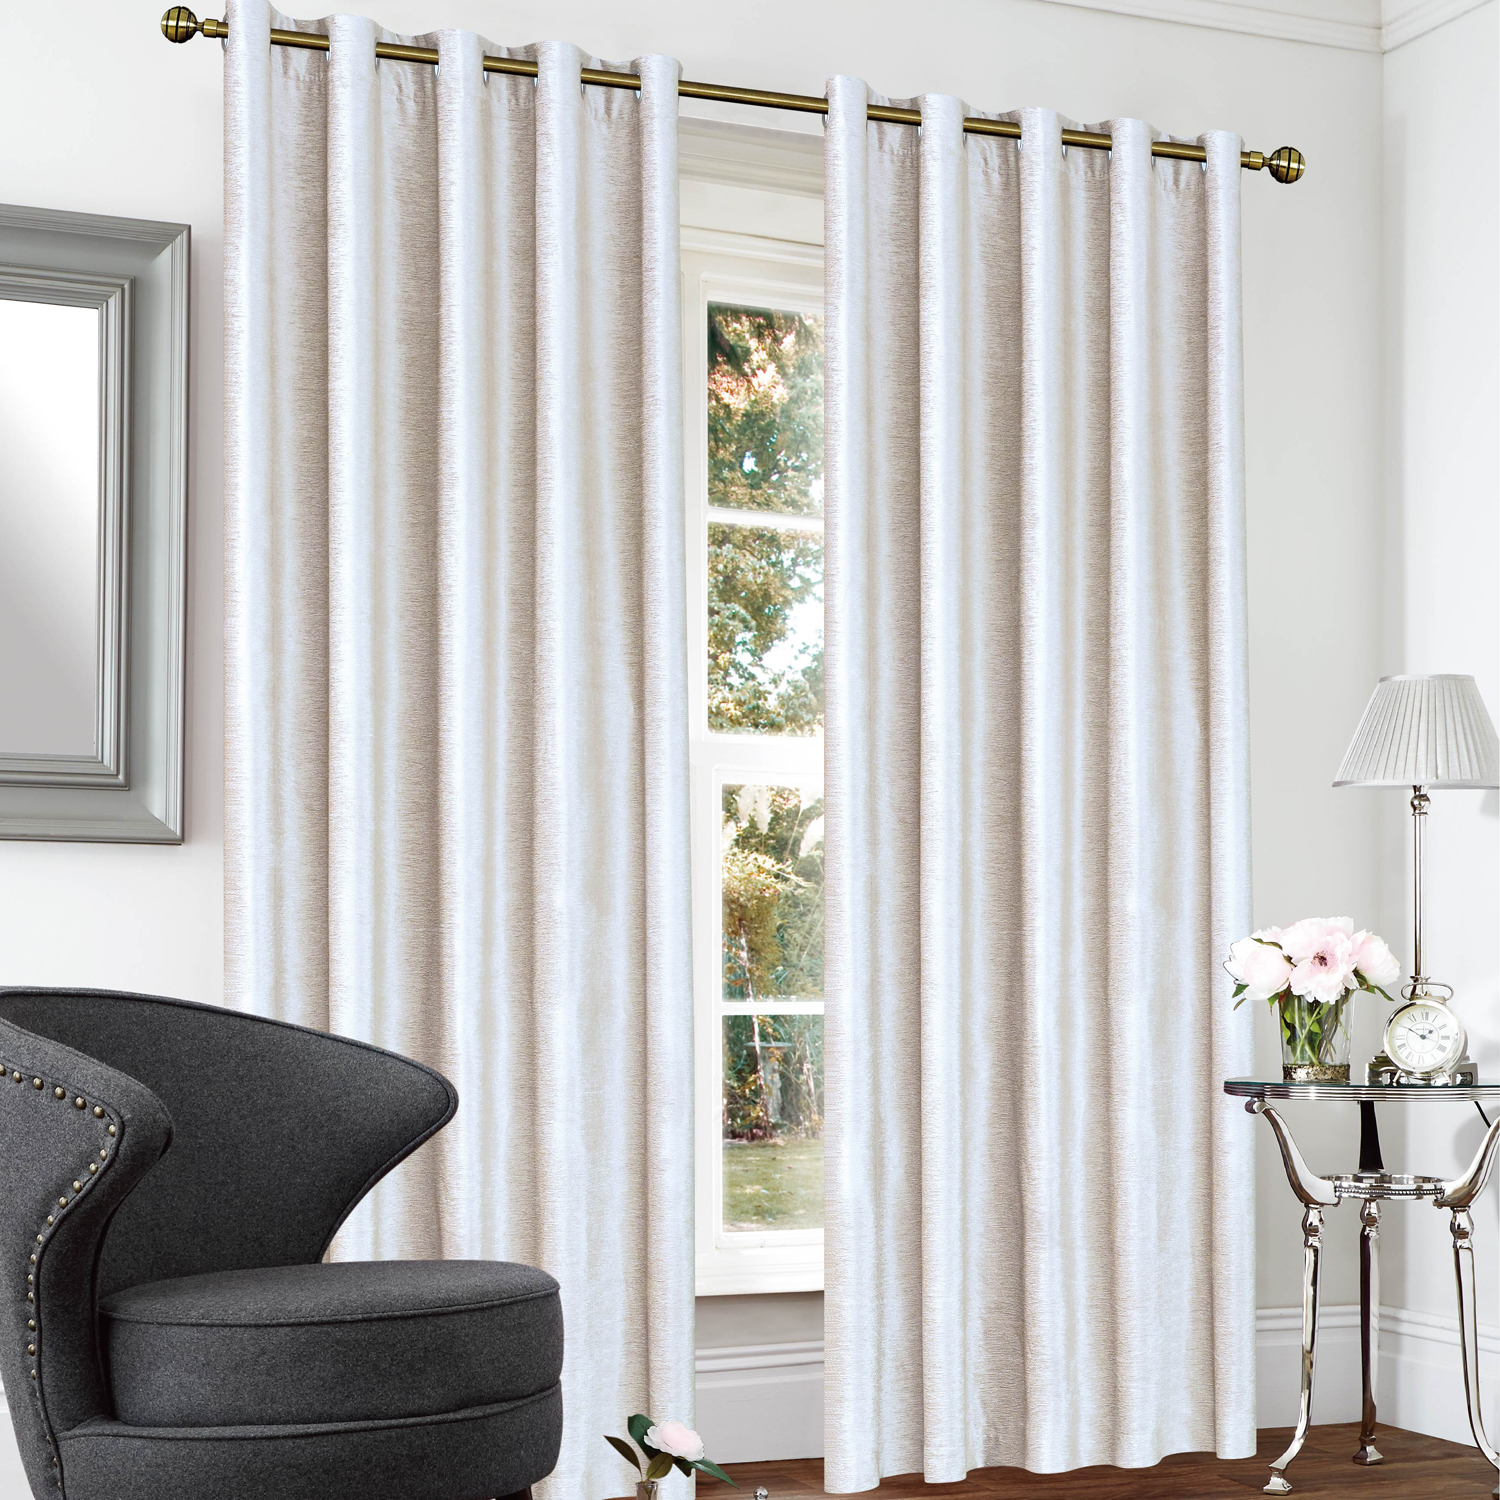 Blackout & Thermal Textured Curtains - Home Store + More